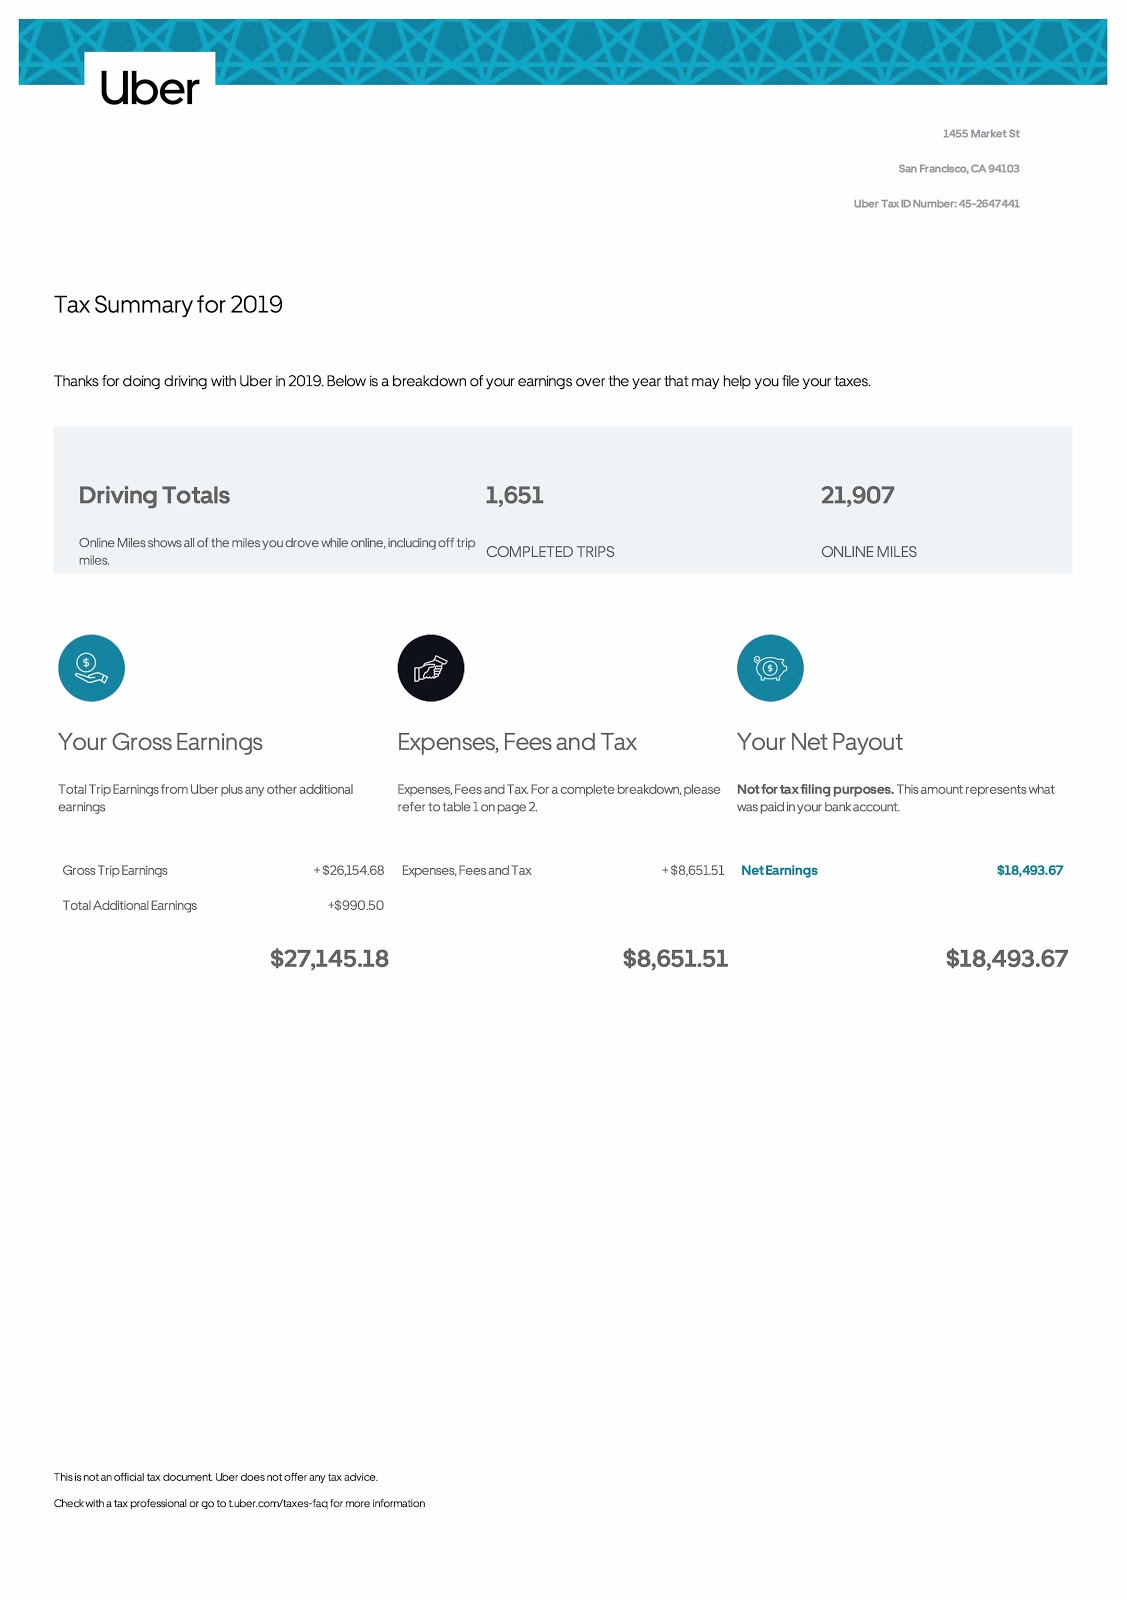 ultimate tax guide for uber lyft drivers updated 2022 what is a trading and profit loss account mapping trial balance to financial statements